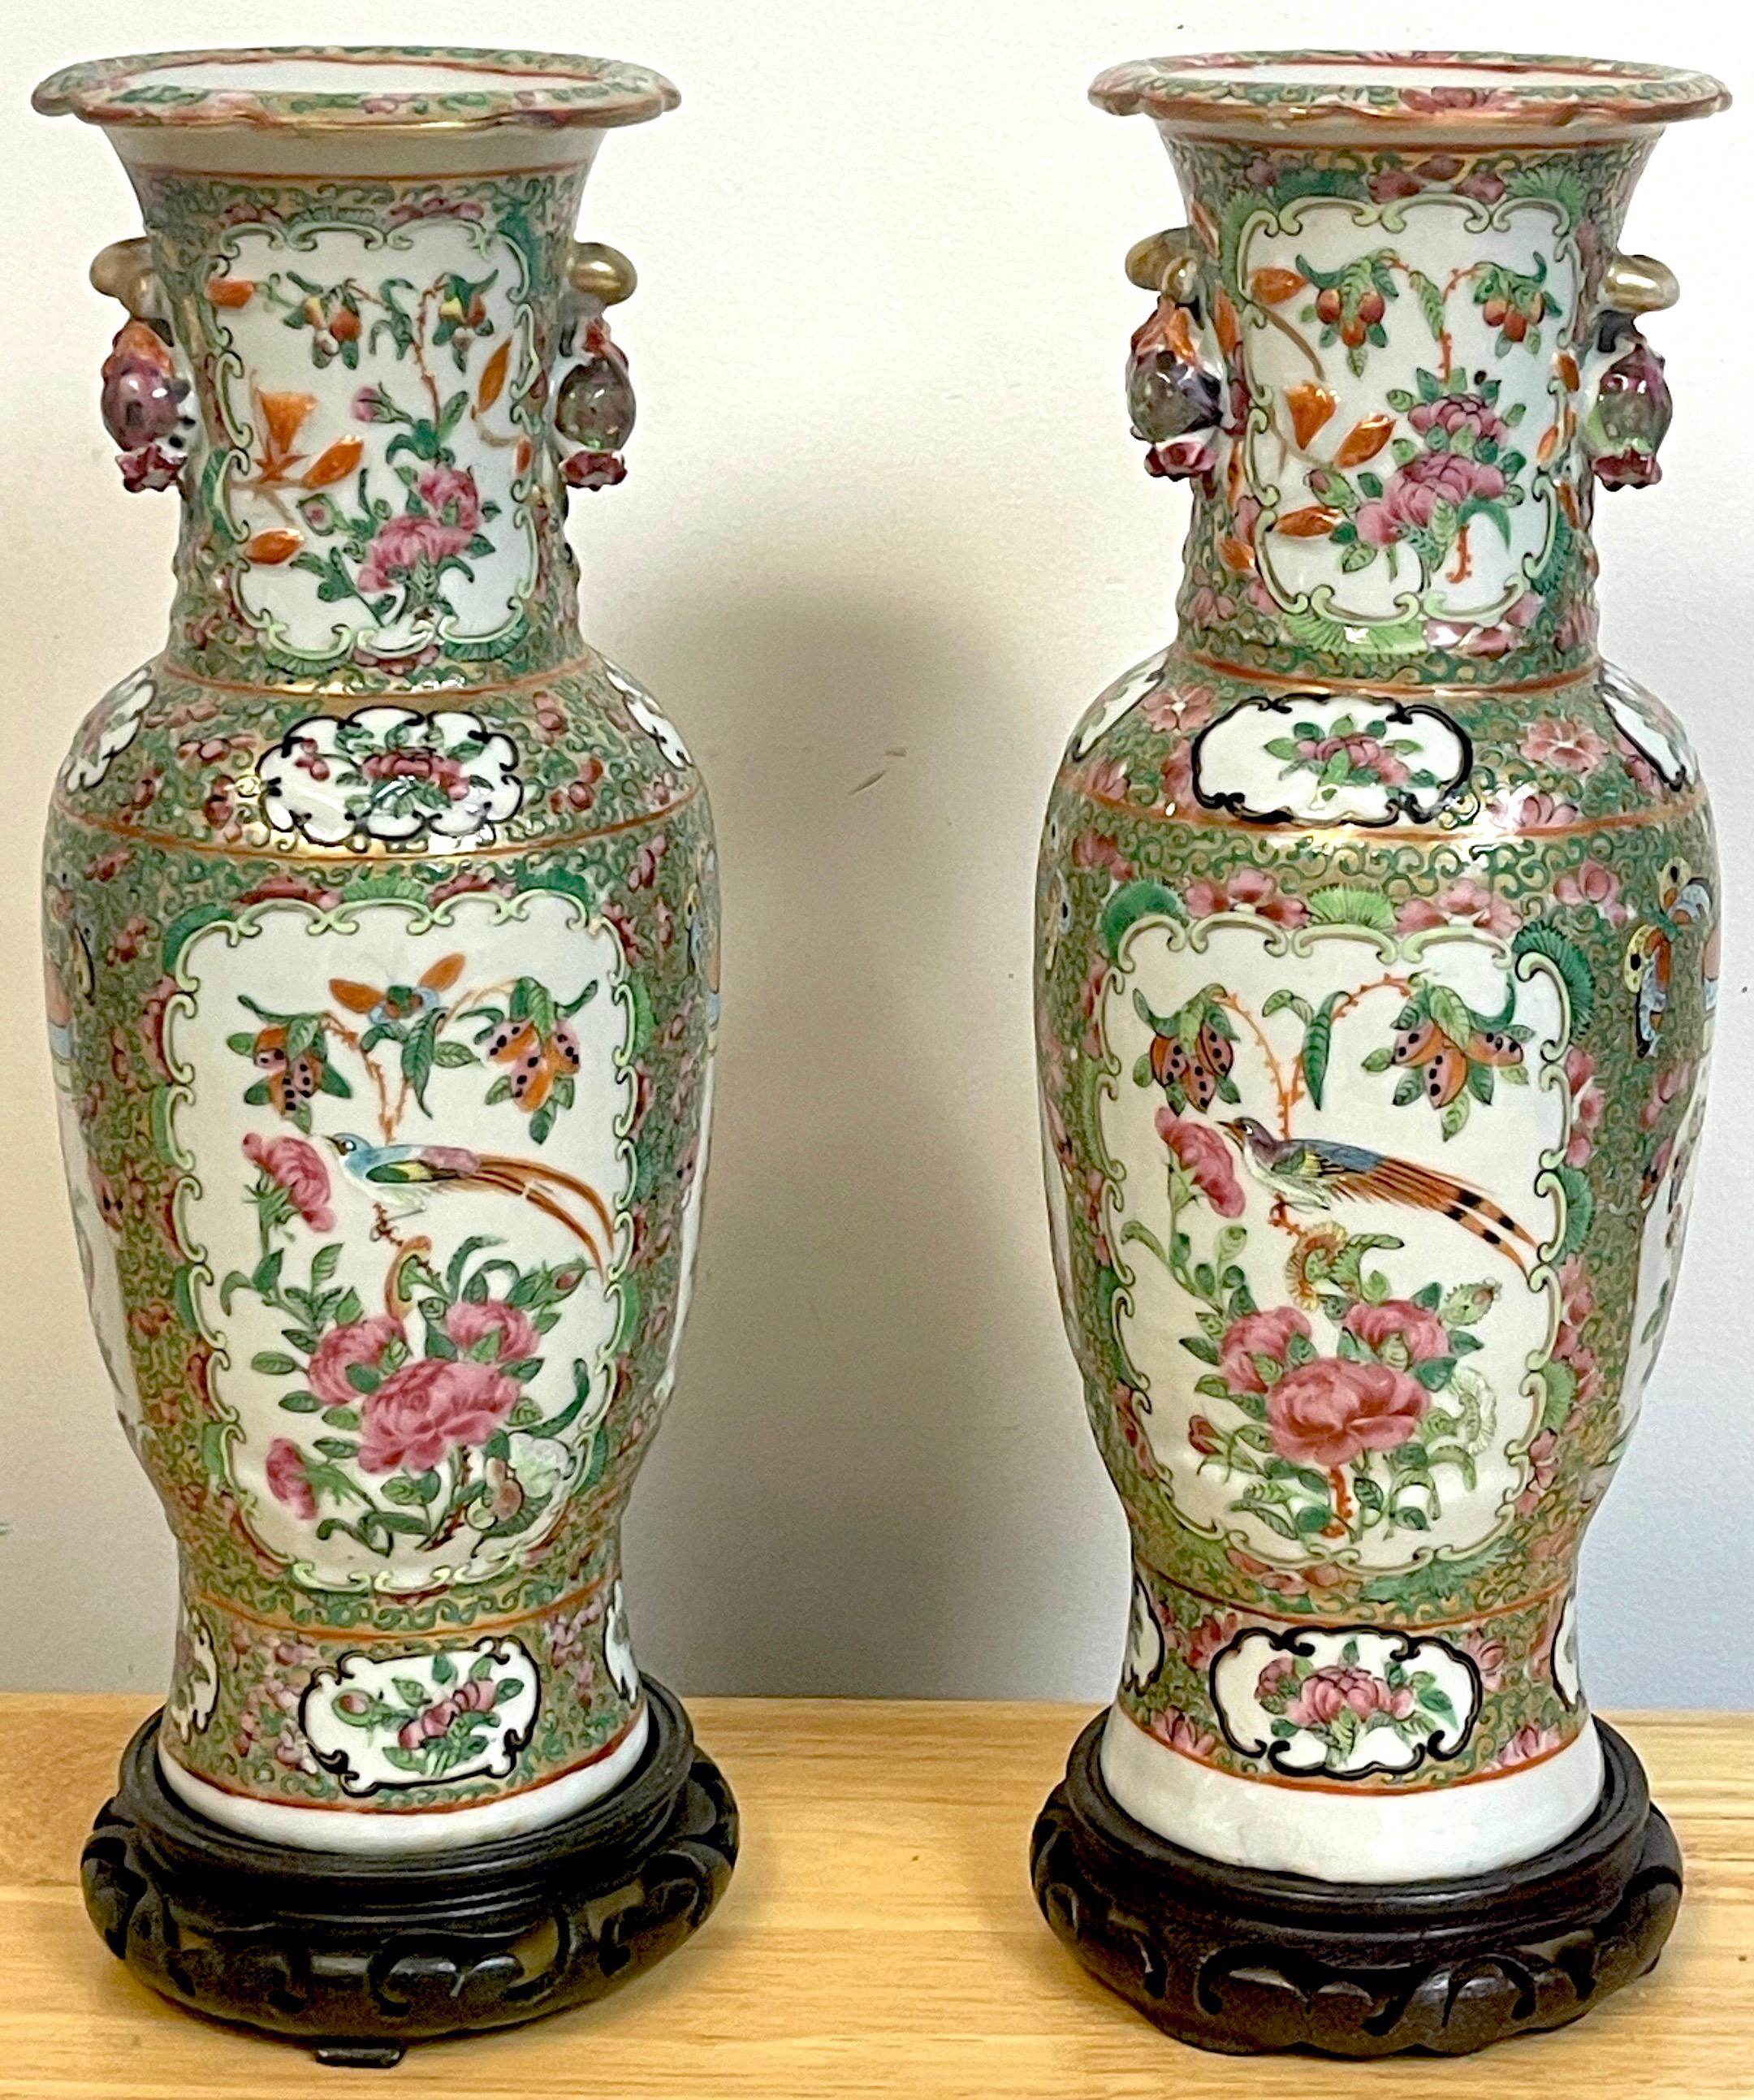 Pair of 19th century rose canton vases & stands, each one profusely decorated with vignettes of birds and florals to the fronts and backs. The sides with applied pomegranate handles, the lower decorated with foo dog handled vases. Truly unusual